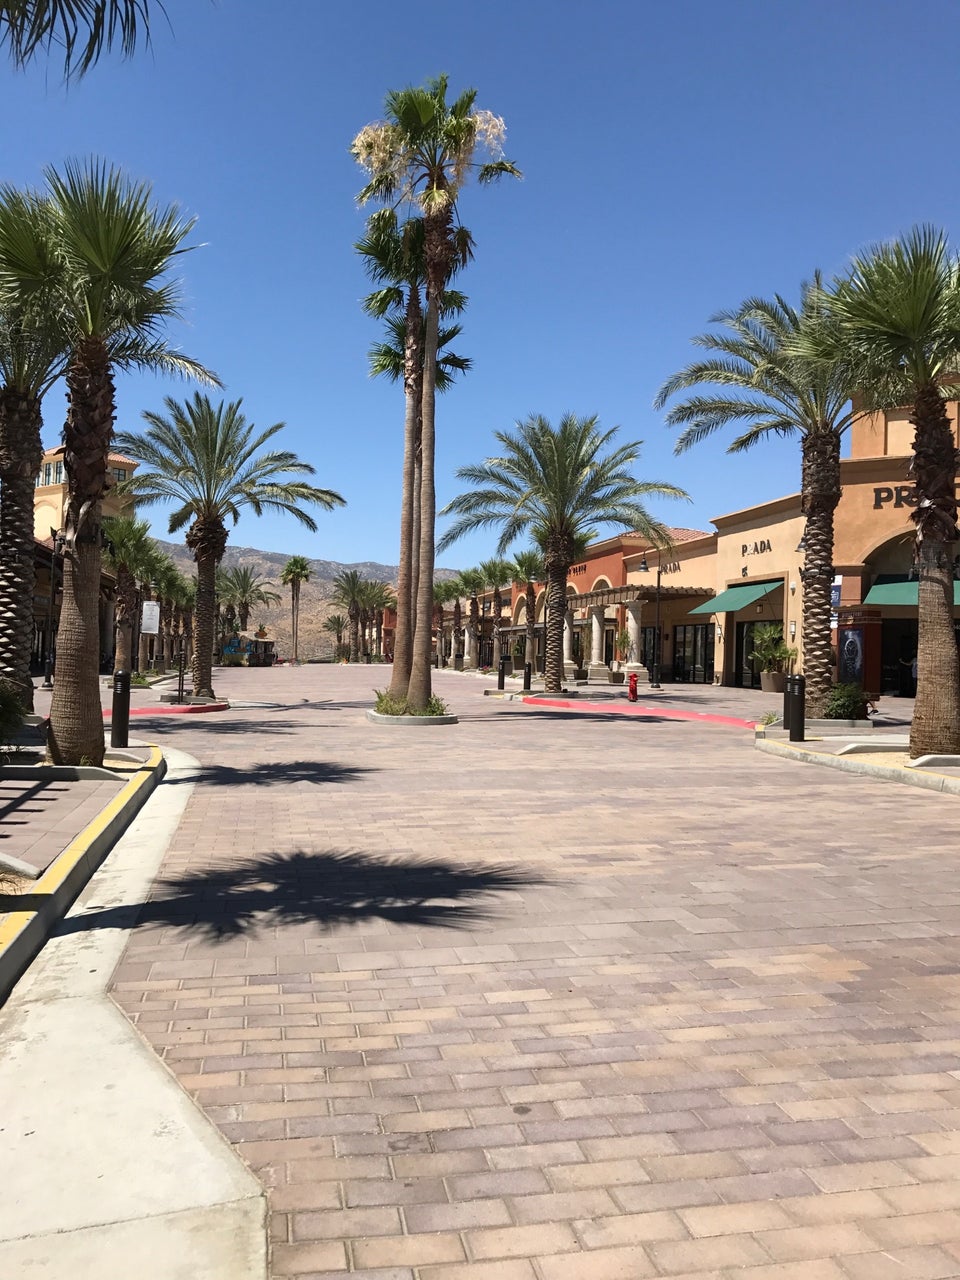 GUCCI OUTLET - 314 Photos & 241 Reviews - 48650 Seminole Dr Desert Hills  Premium Outlet, Cabazon, California - Men's Clothing - Phone Number - Yelp